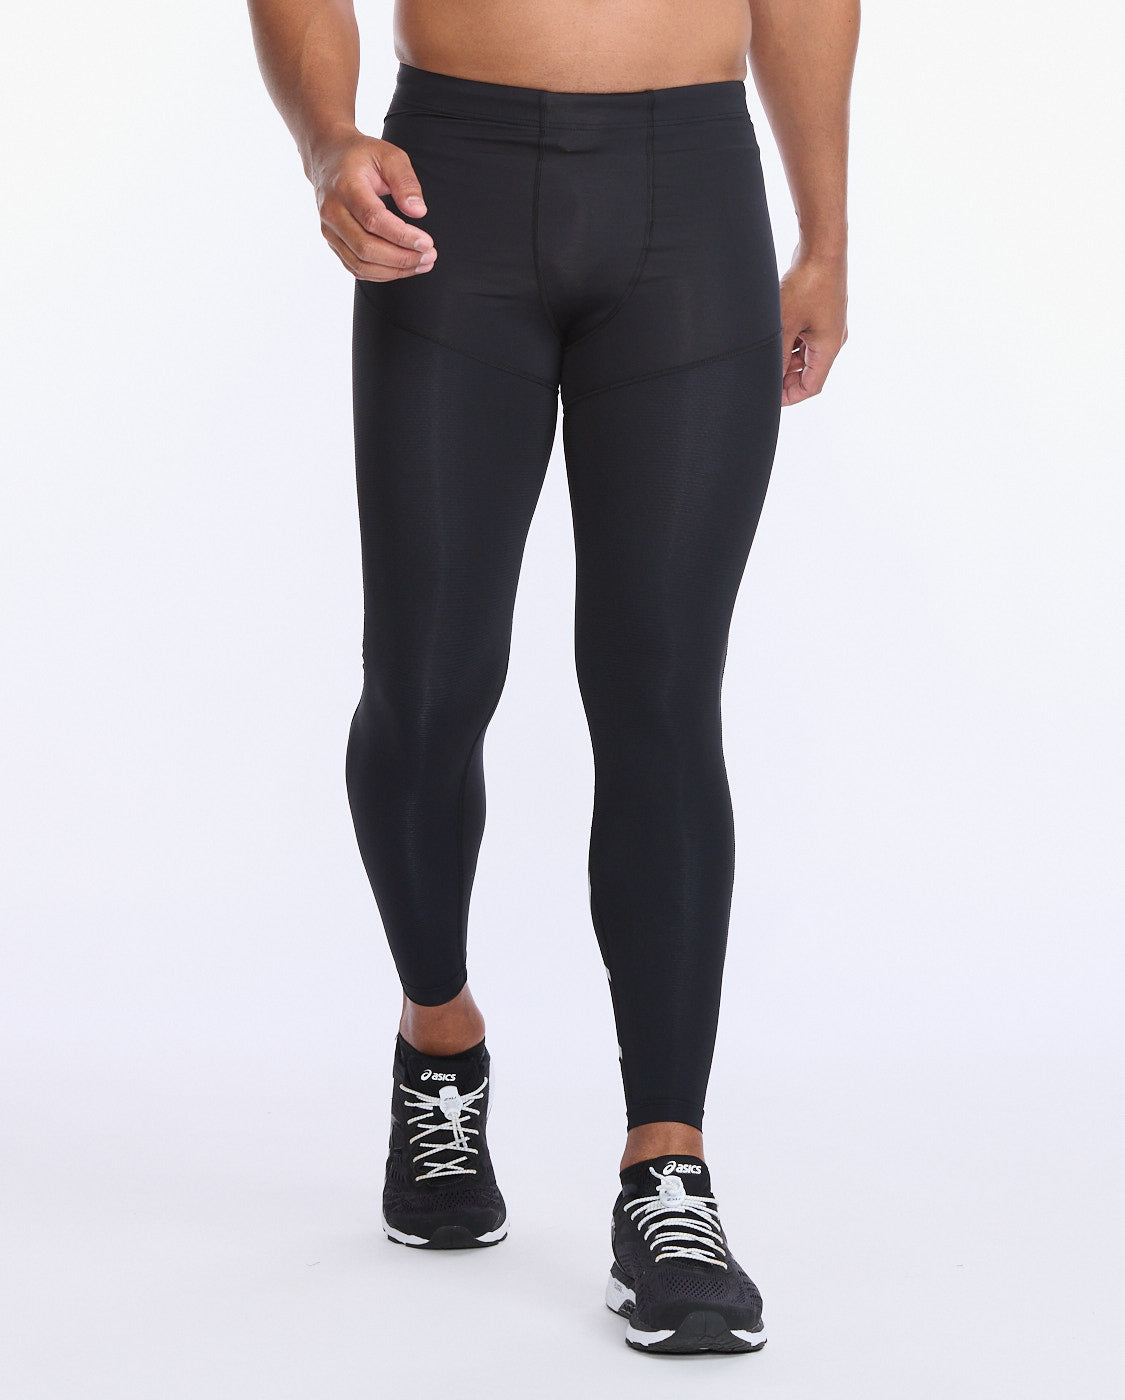 2XU Power Recovery Compression Tights - MyTriathlon